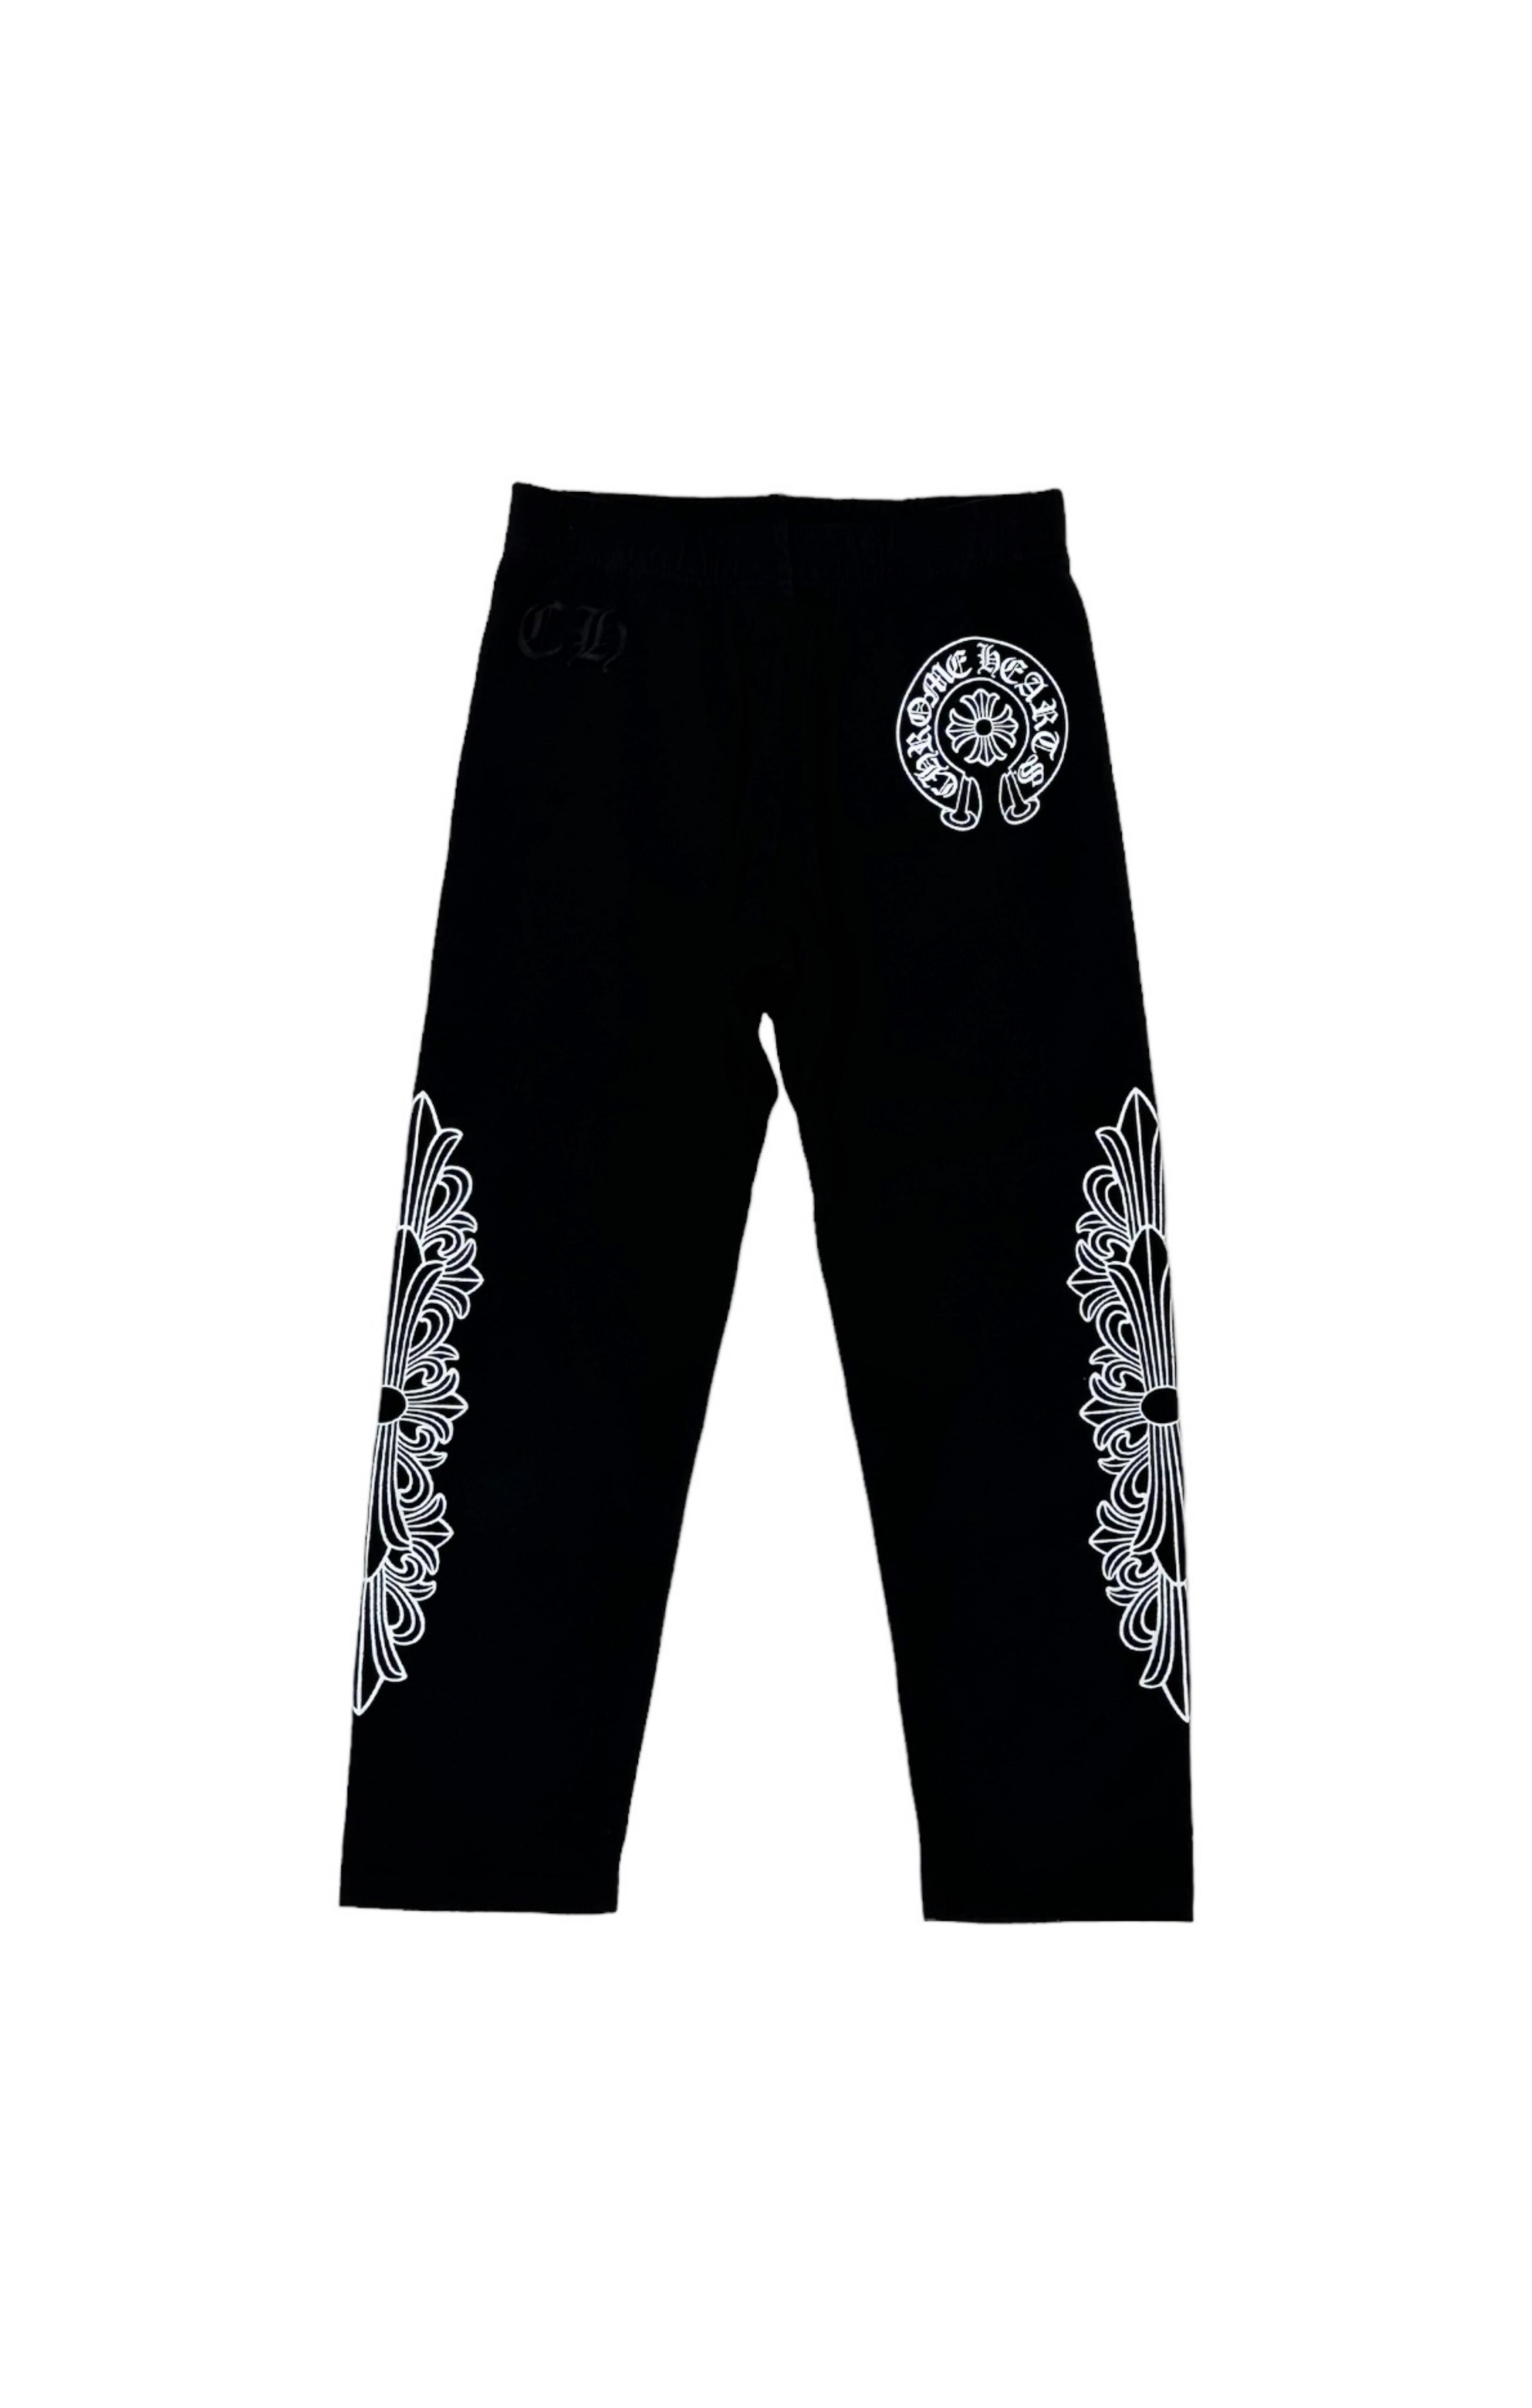 CHROME HEARTS (RARE) Leggings Size: No size tags, fit like 5 Years